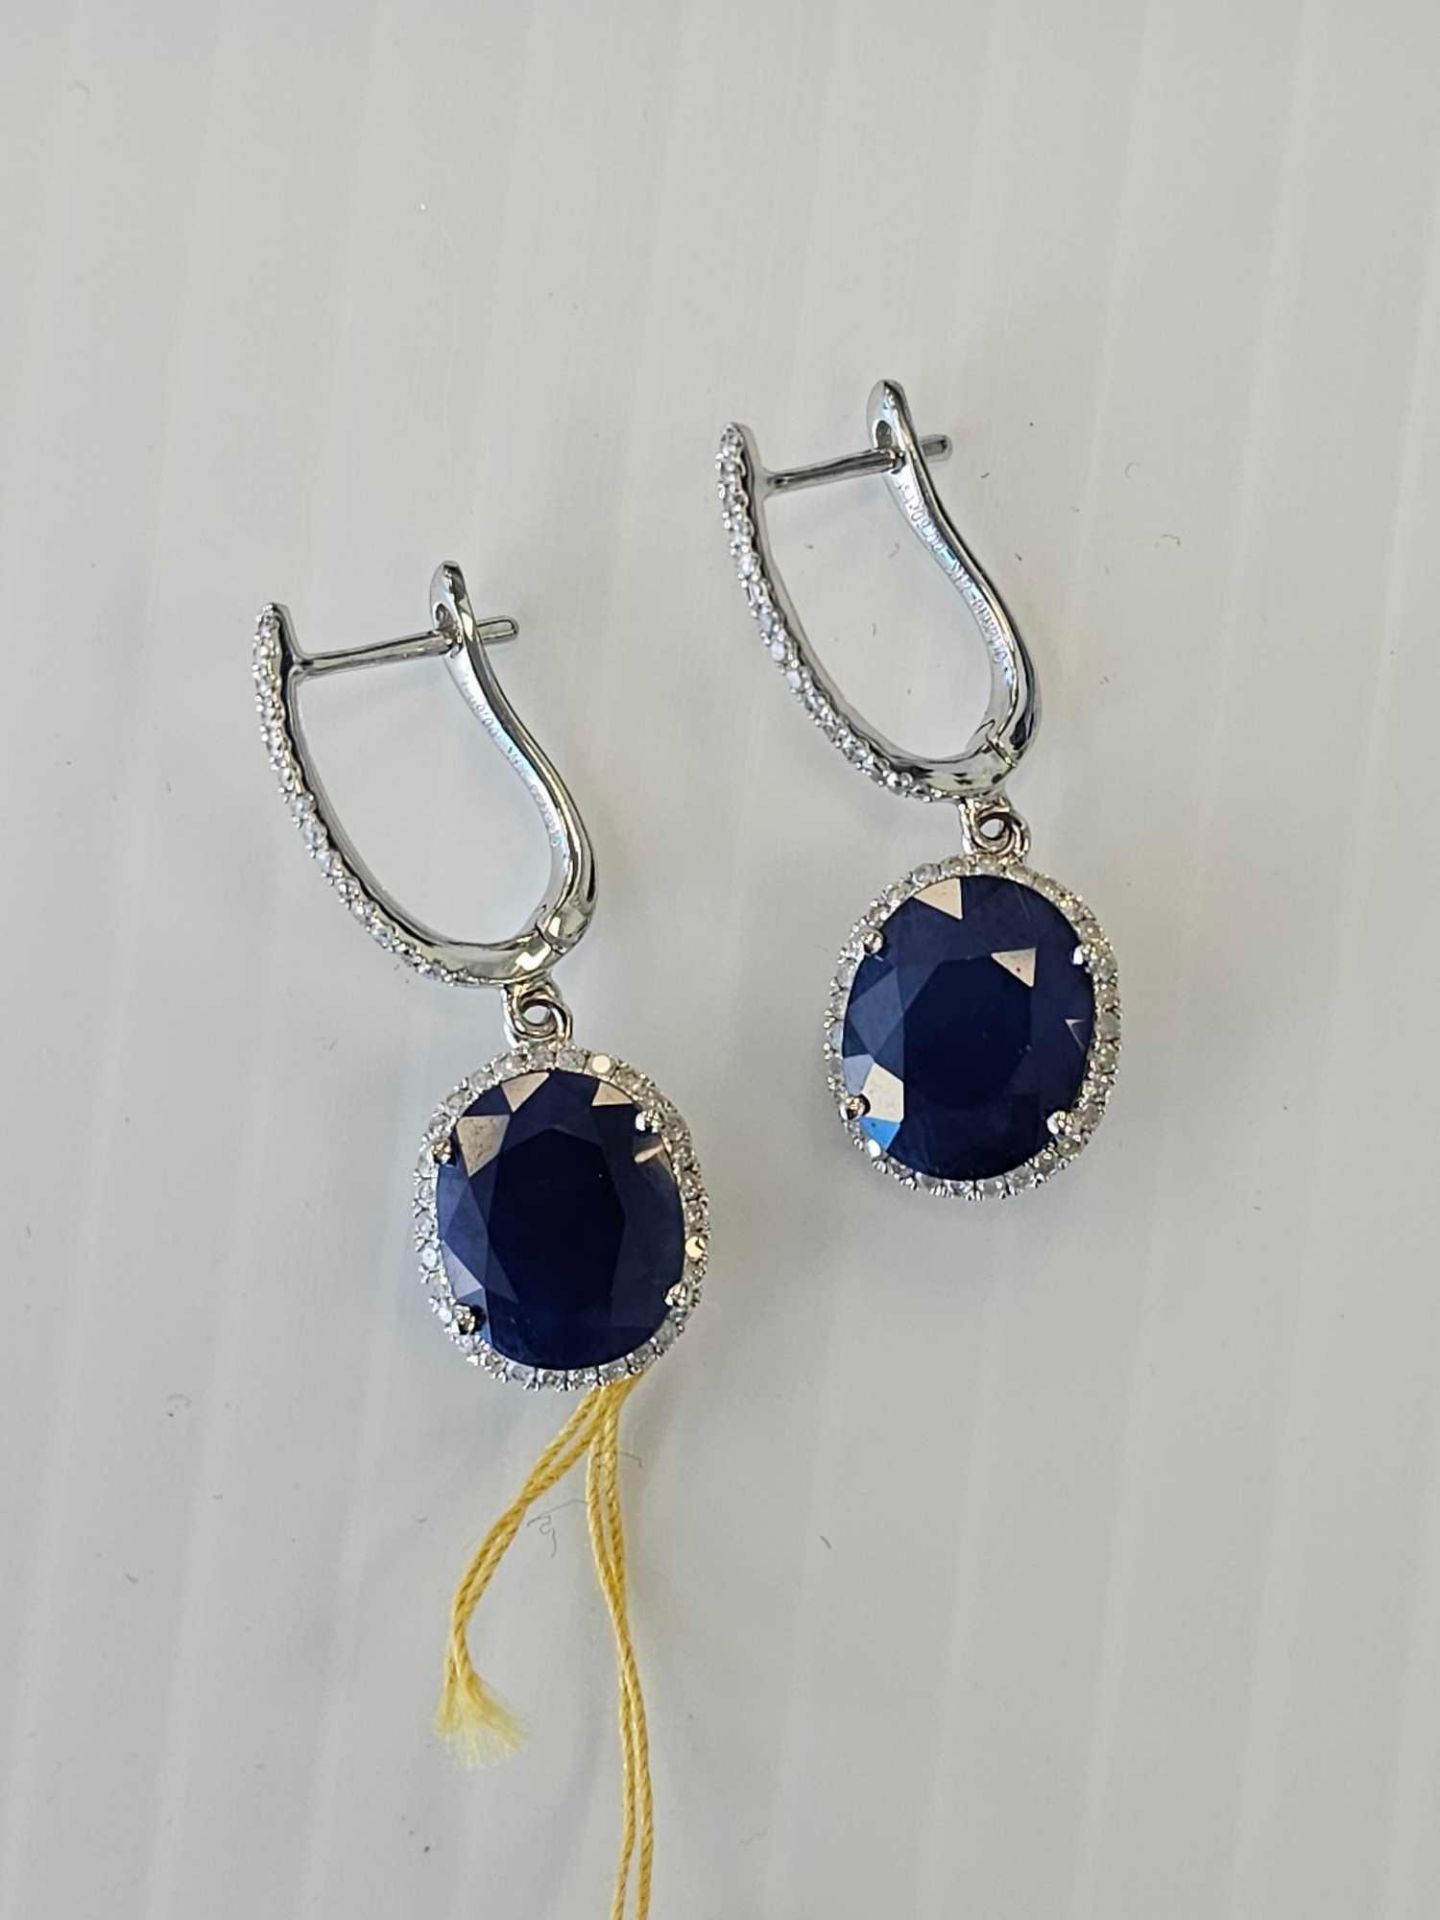 14kt sapphire and diamond earrings - Image 5 of 5